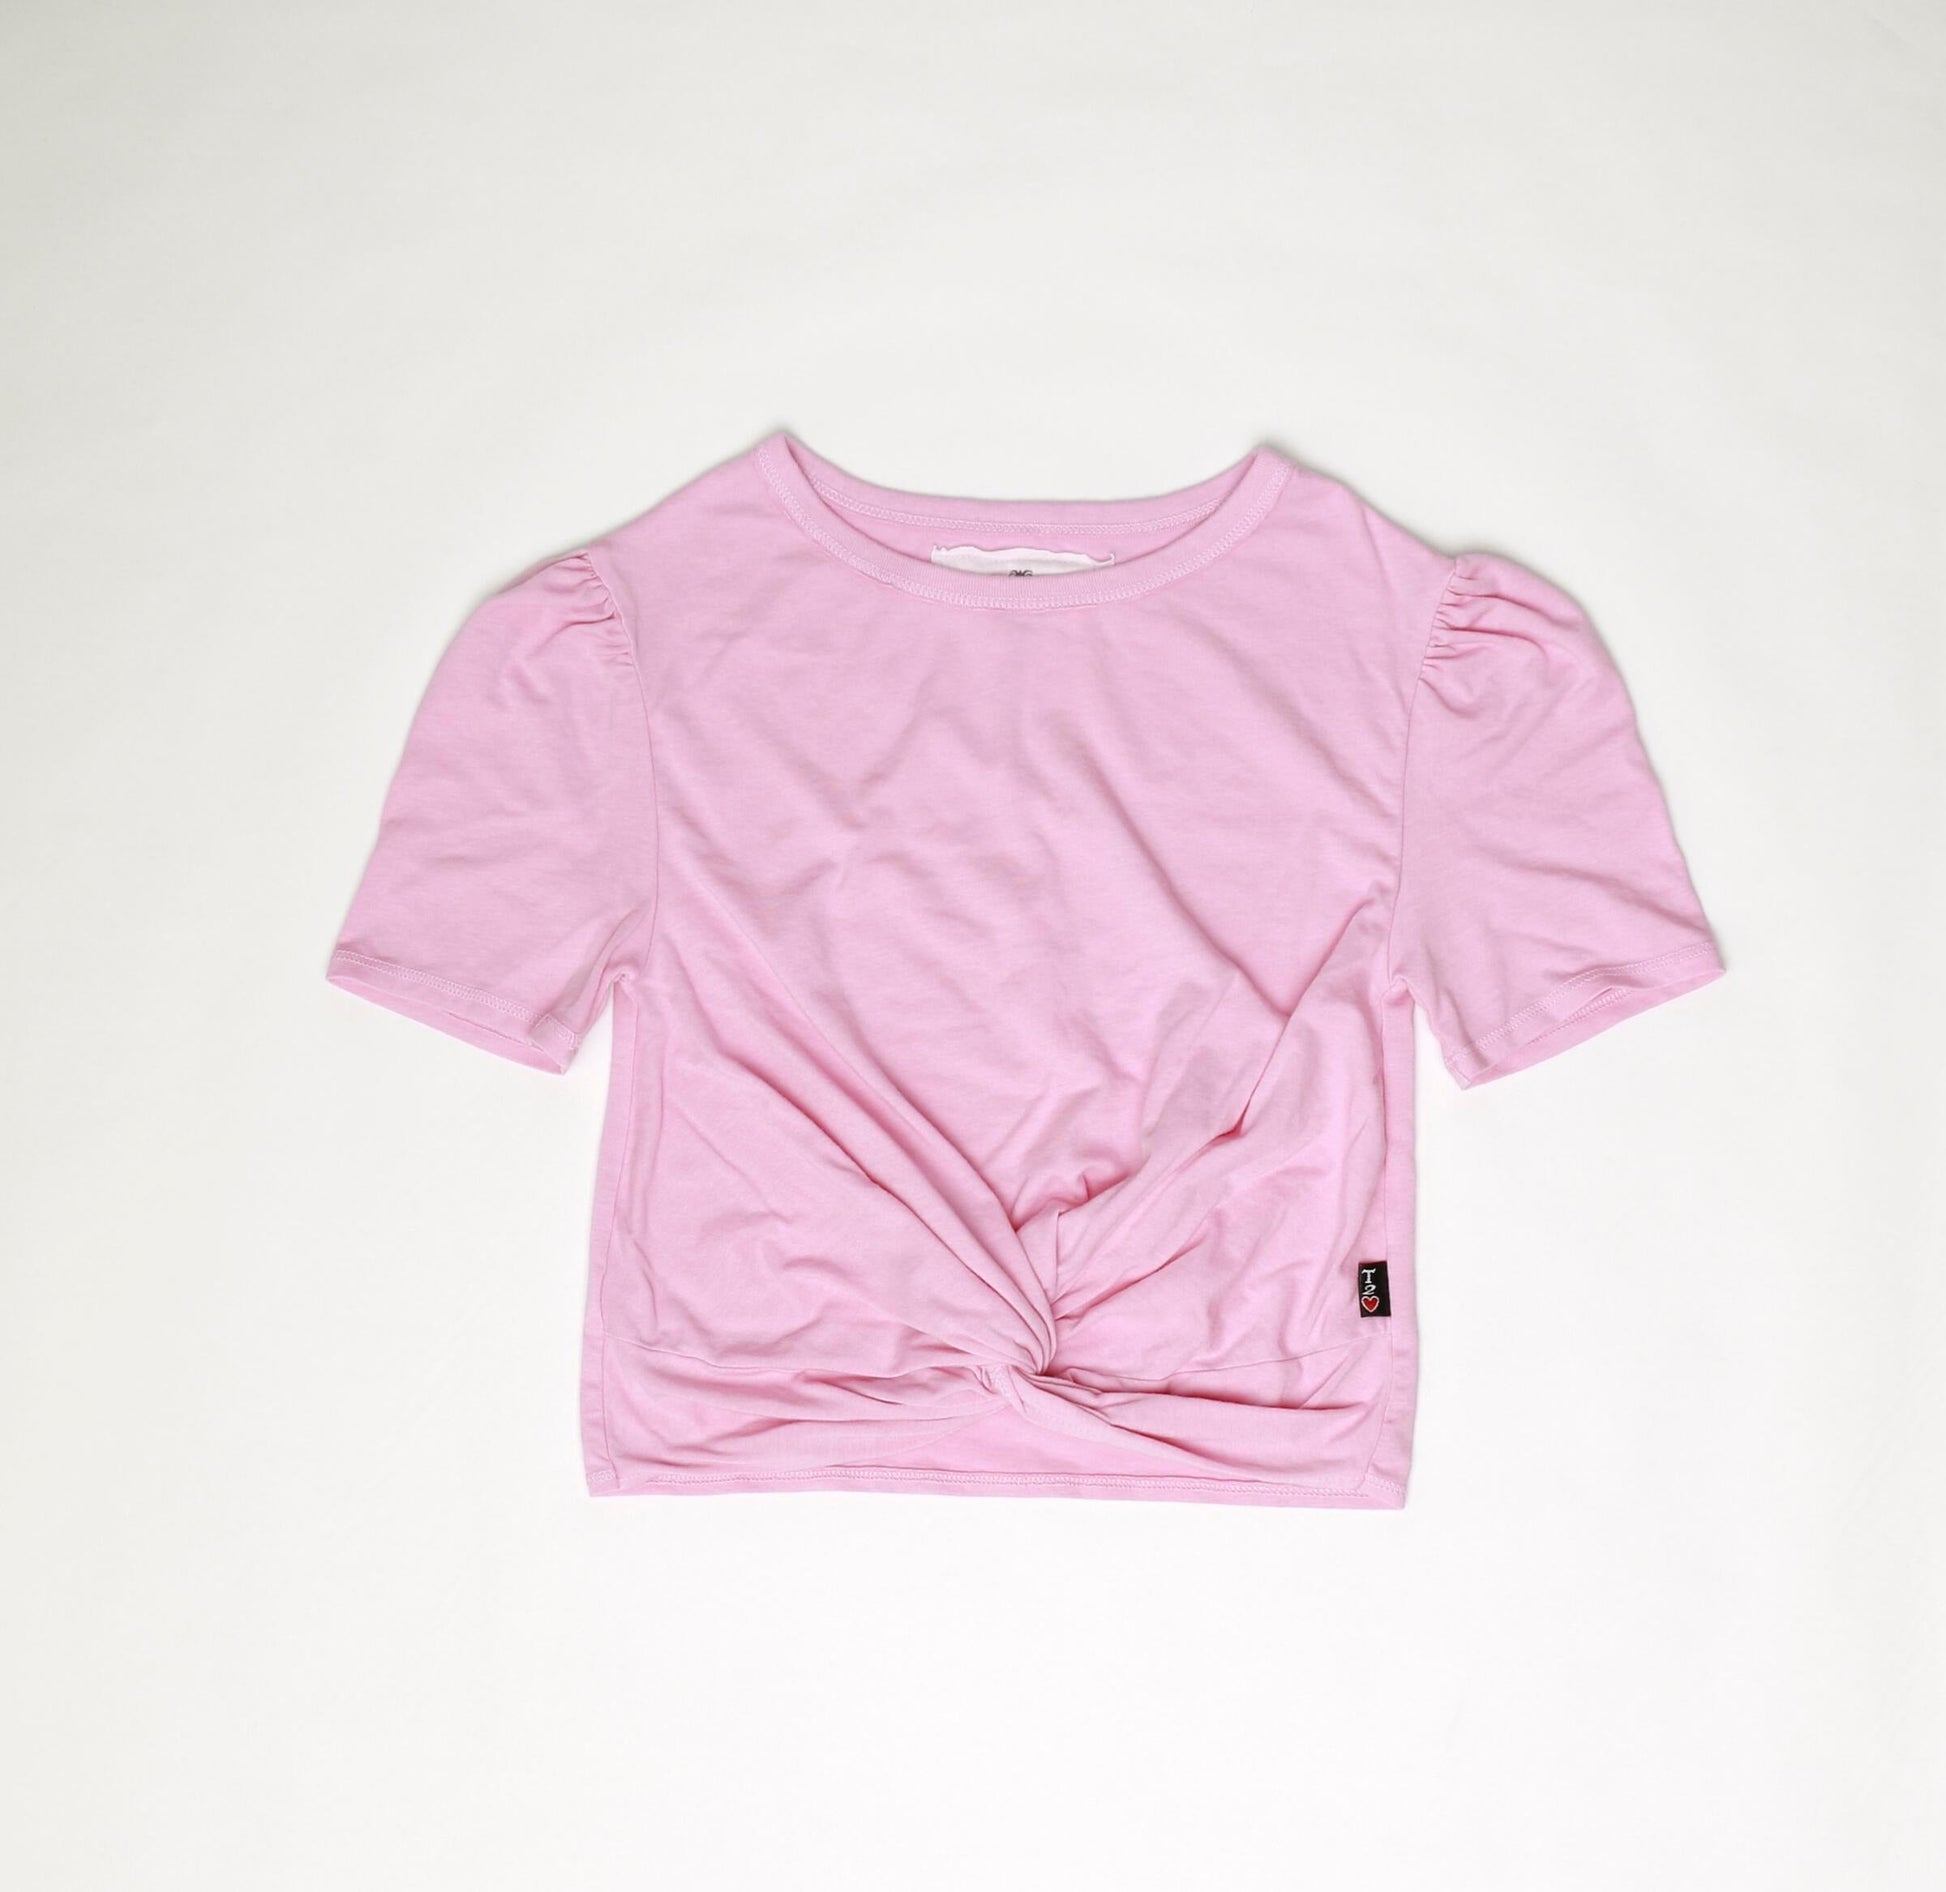 Girls Tee Knotted T2Love – T2Love,